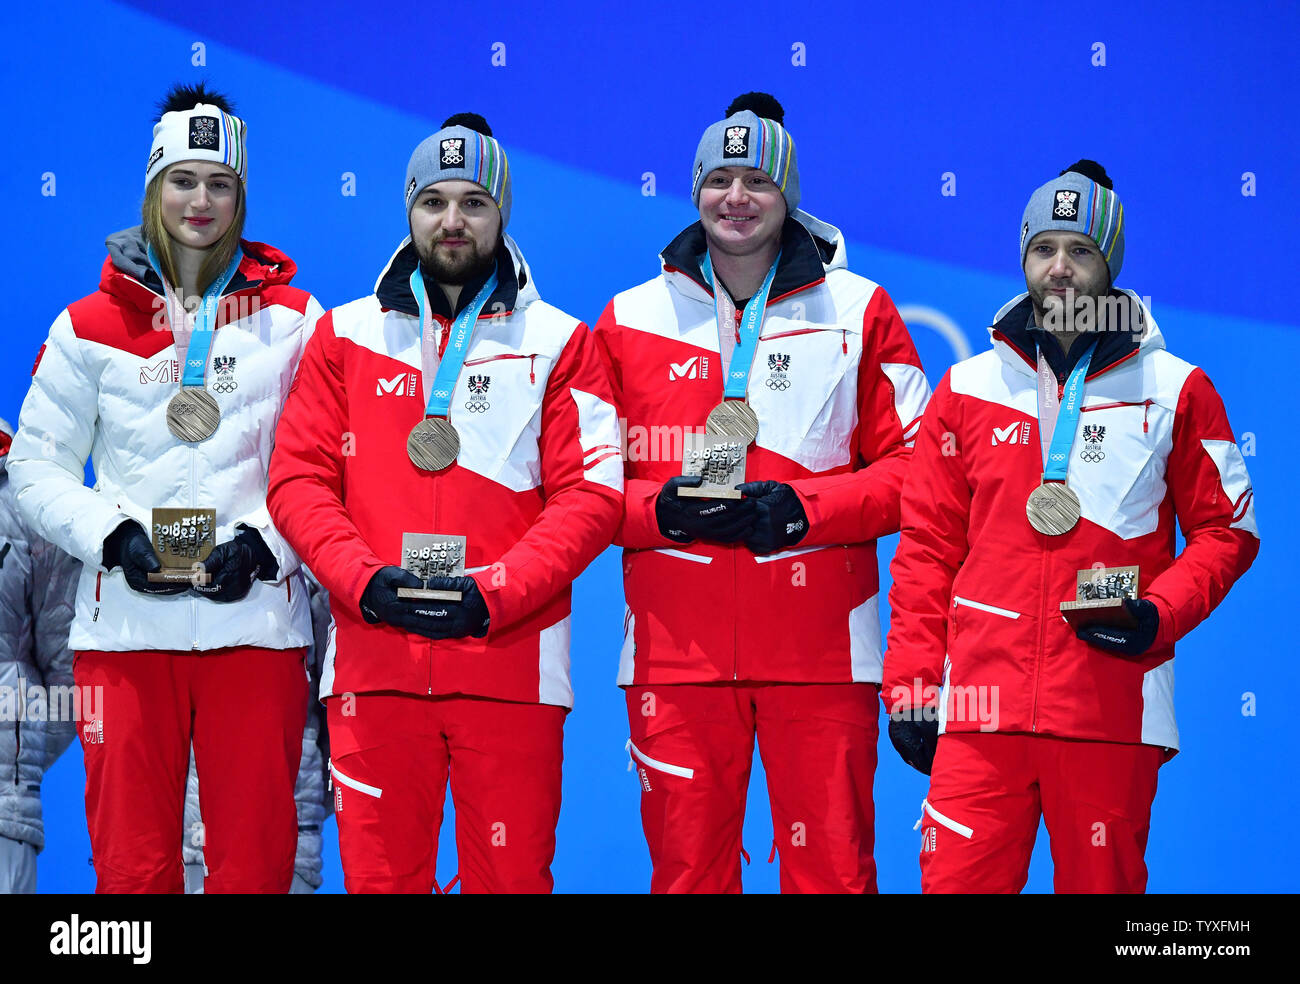 Bronze medalist Austria's Madeleine Egle, David Gleirscher, Peter Penz and Georg Fischler pose during the medal ceremony for Luge Team Relay at the Pyeongchang 2018 Winter Olympics in Pyeongchang, South Korea, on February 16, 2018. Photo by Kevin Dietsch/UPI Stock Photo